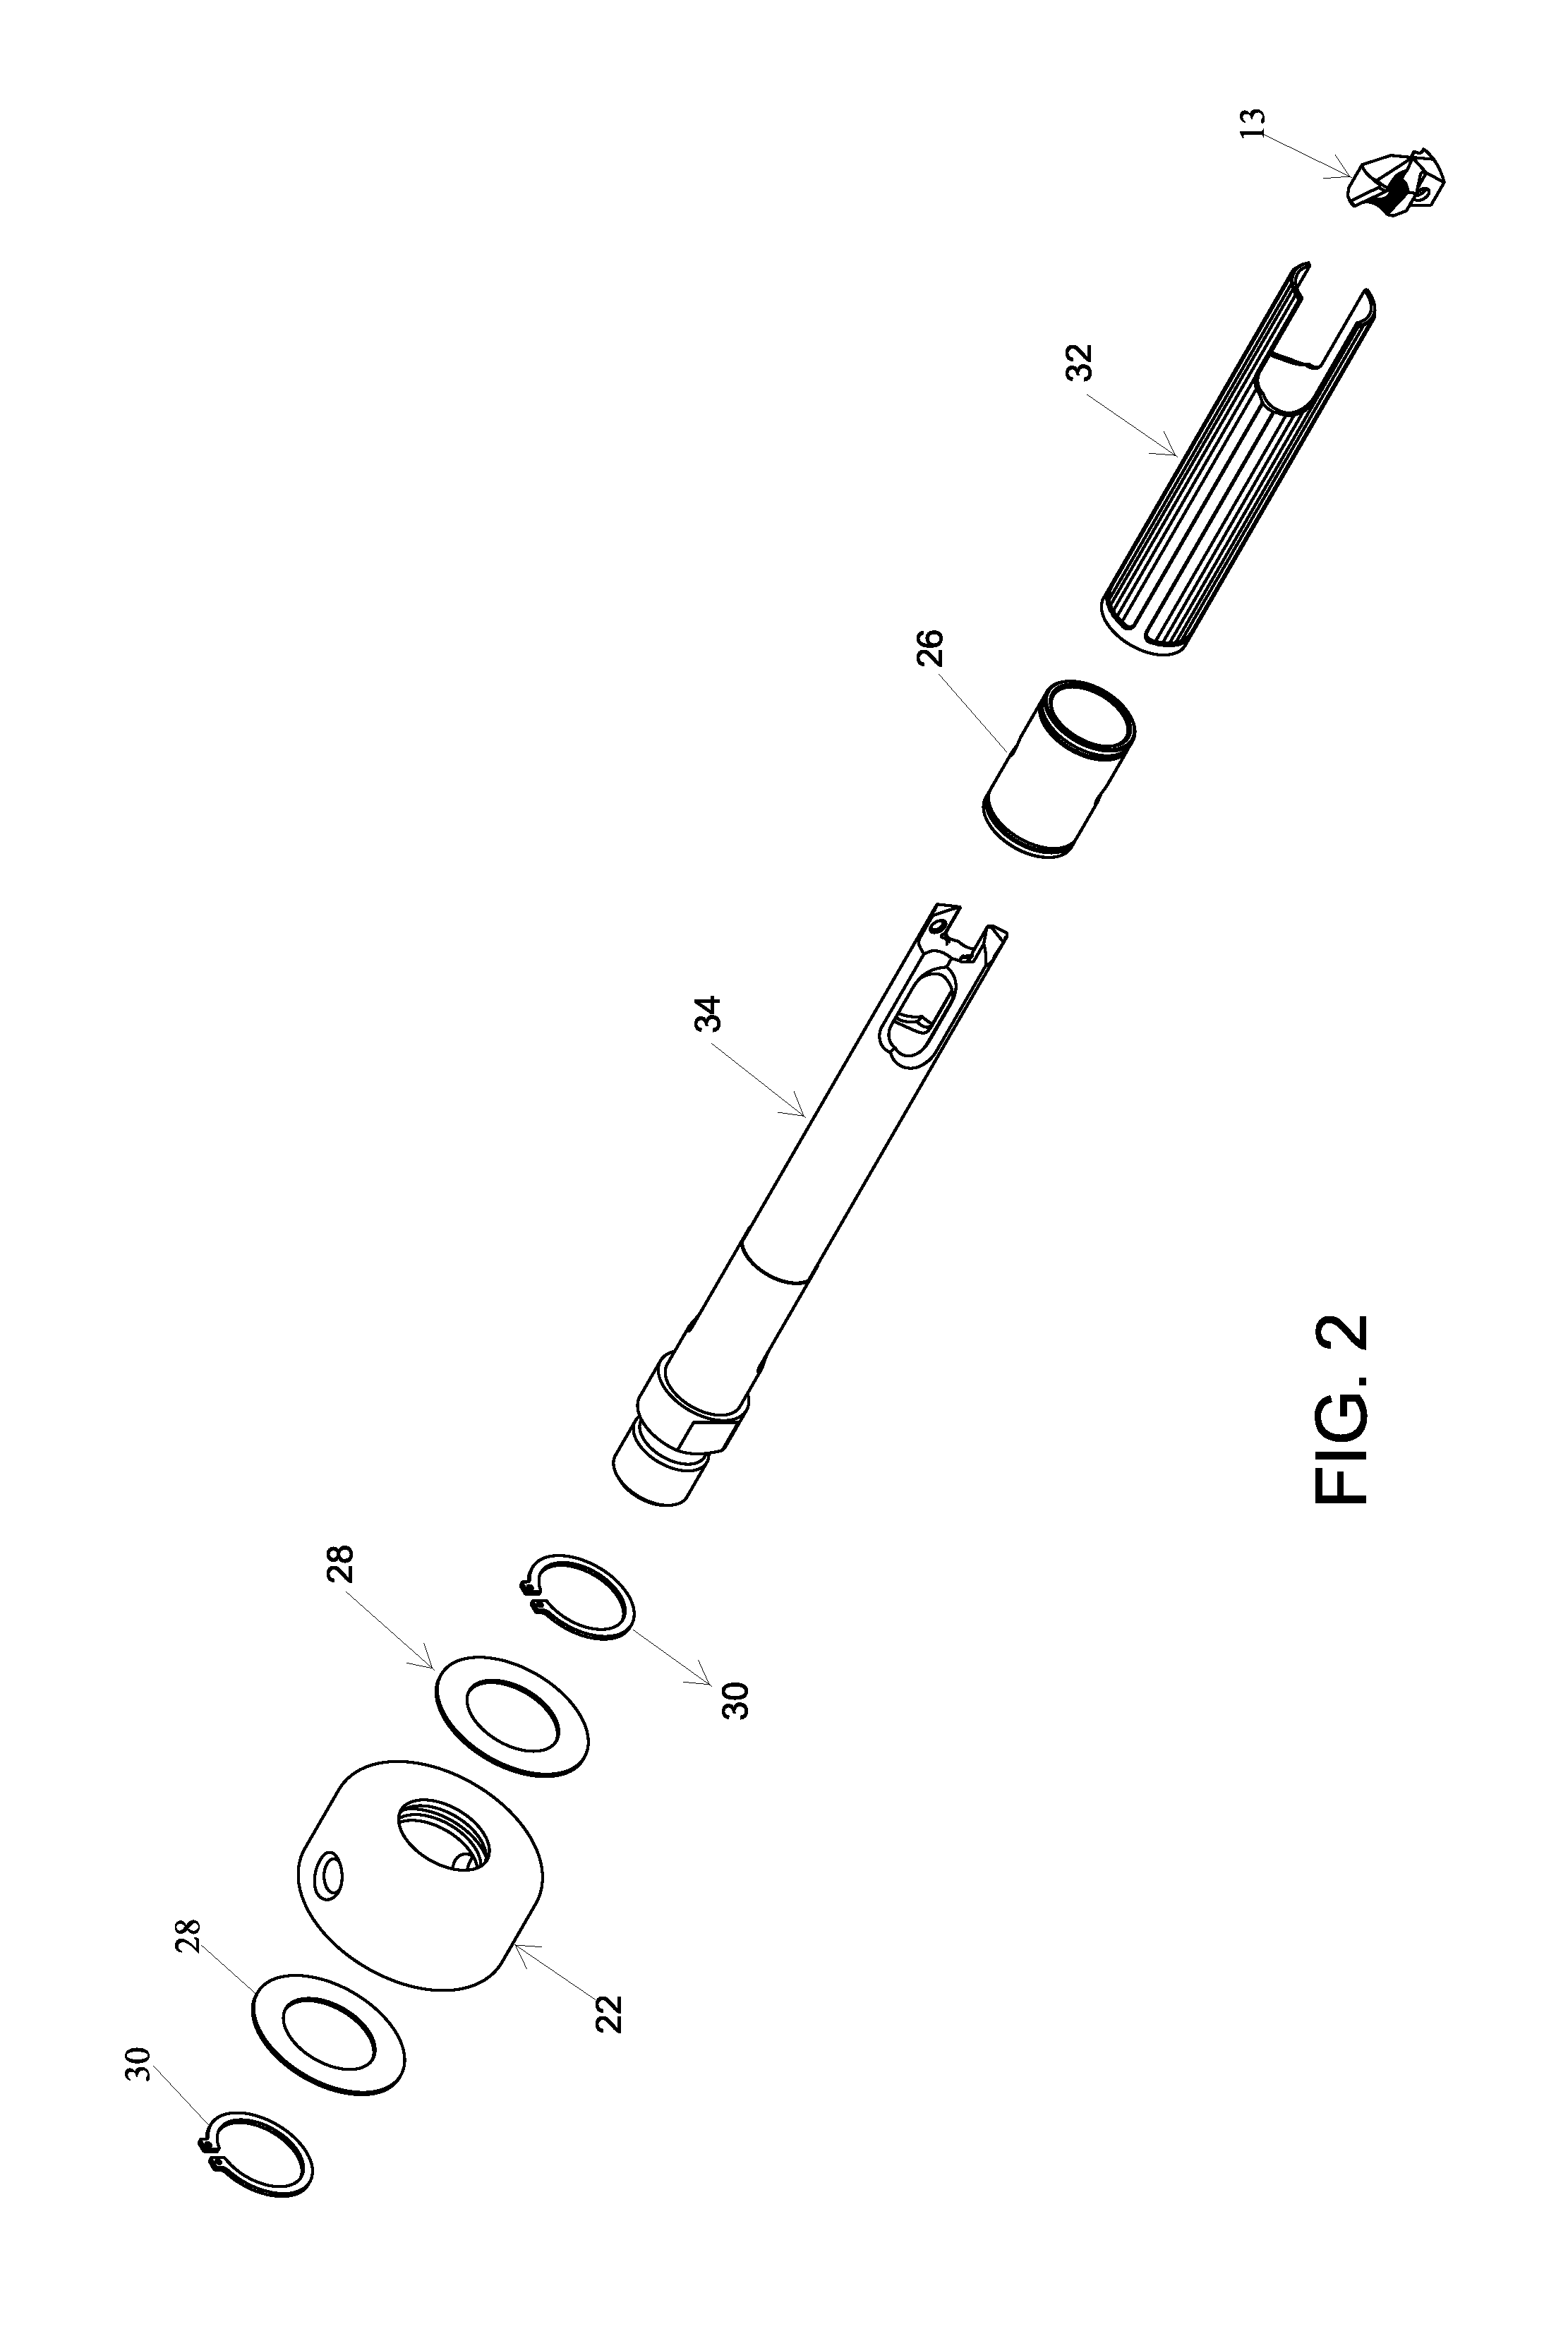 Vacuum drilling system and methods